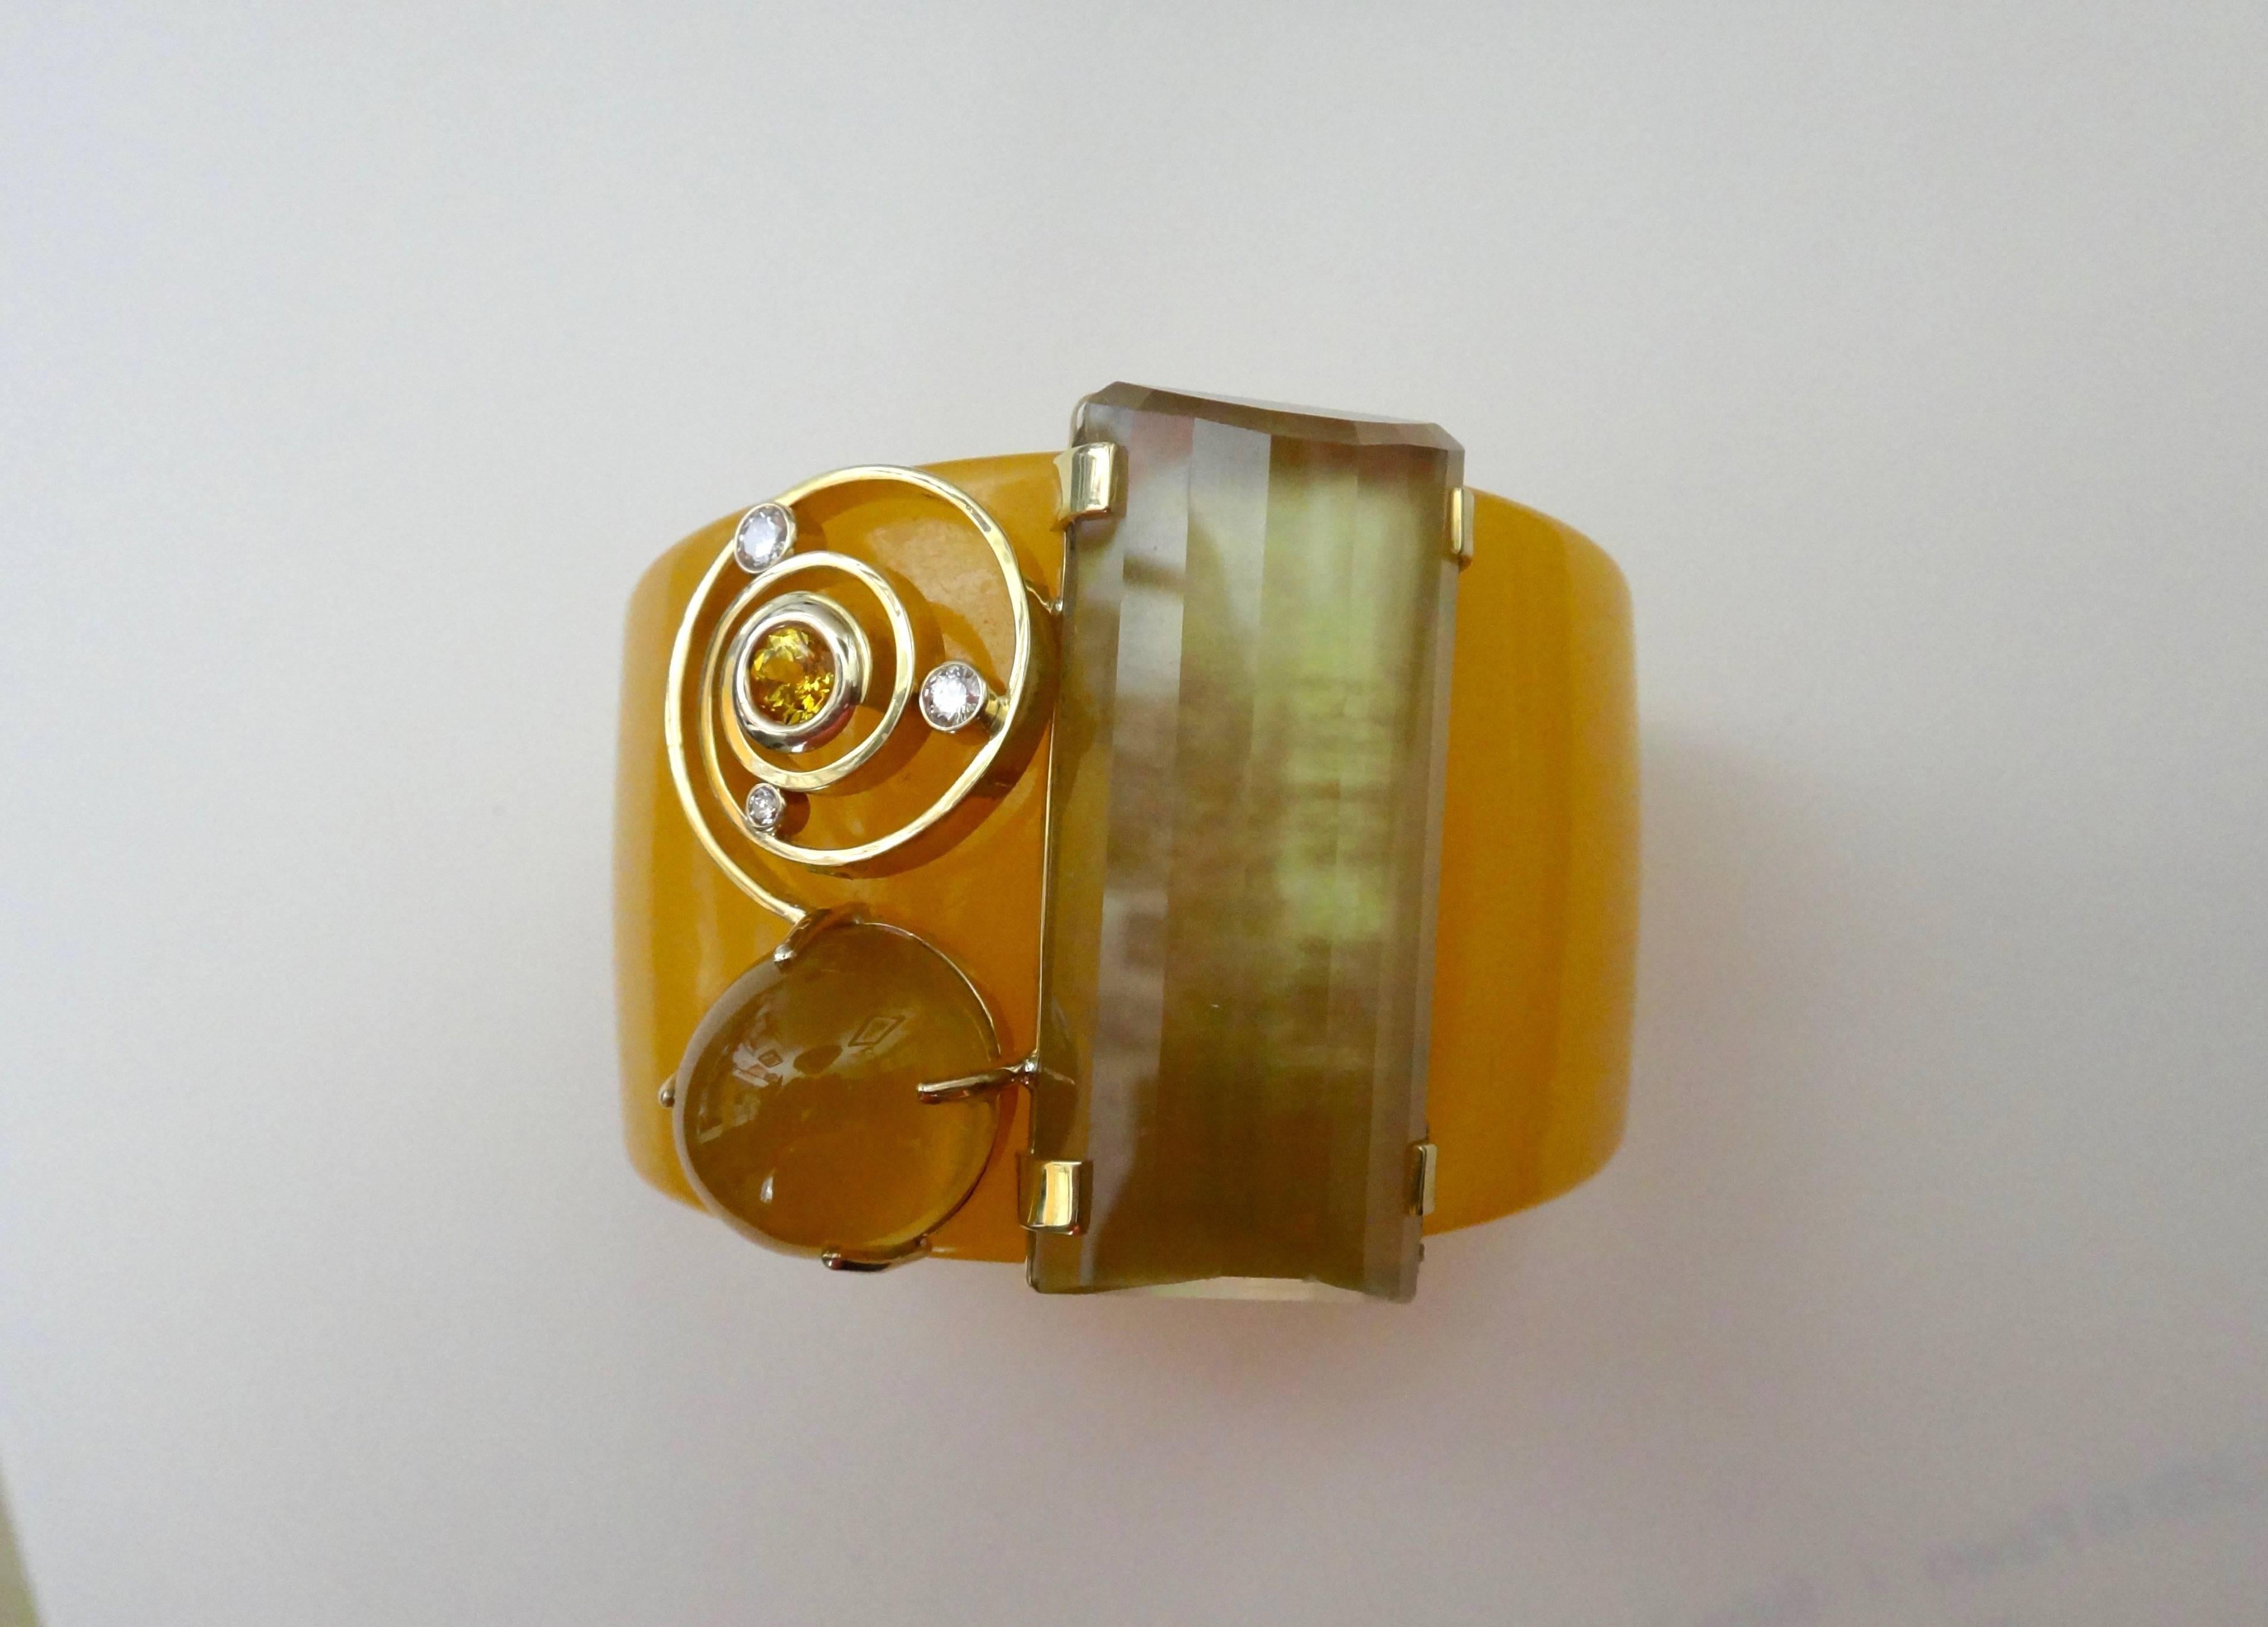 A  Bakelite cuff forms the foundation for this one-of-a-kind bracelet.  The composition consists of a large citrine masterfully cut by Jerry Newman, Botswana agate, yellow sapphire and diamonds.  The golden cluster of gems are set in 18k yellow